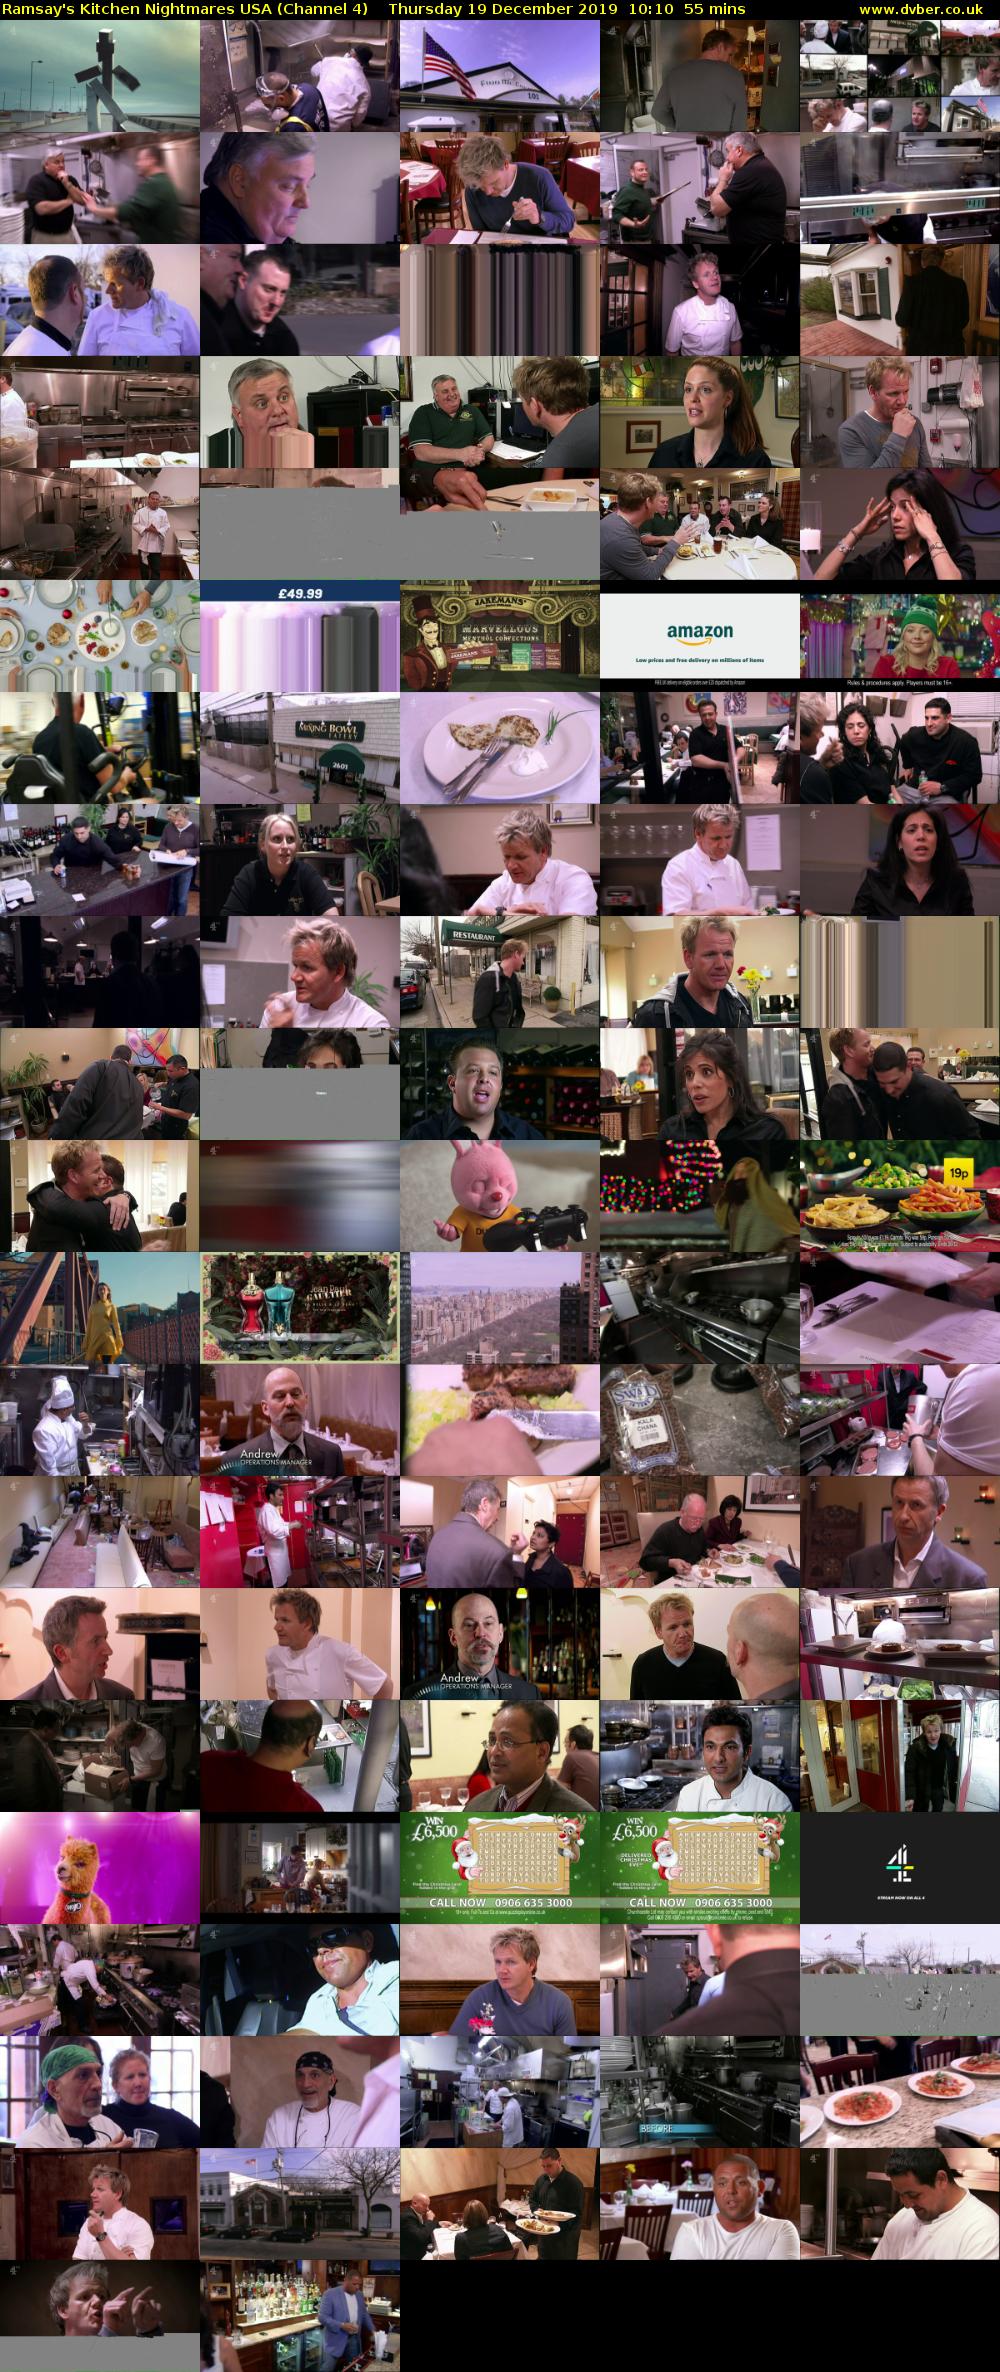 Ramsay's Kitchen Nightmares USA (Channel 4) Thursday 19 December 2019 10:10 - 11:05